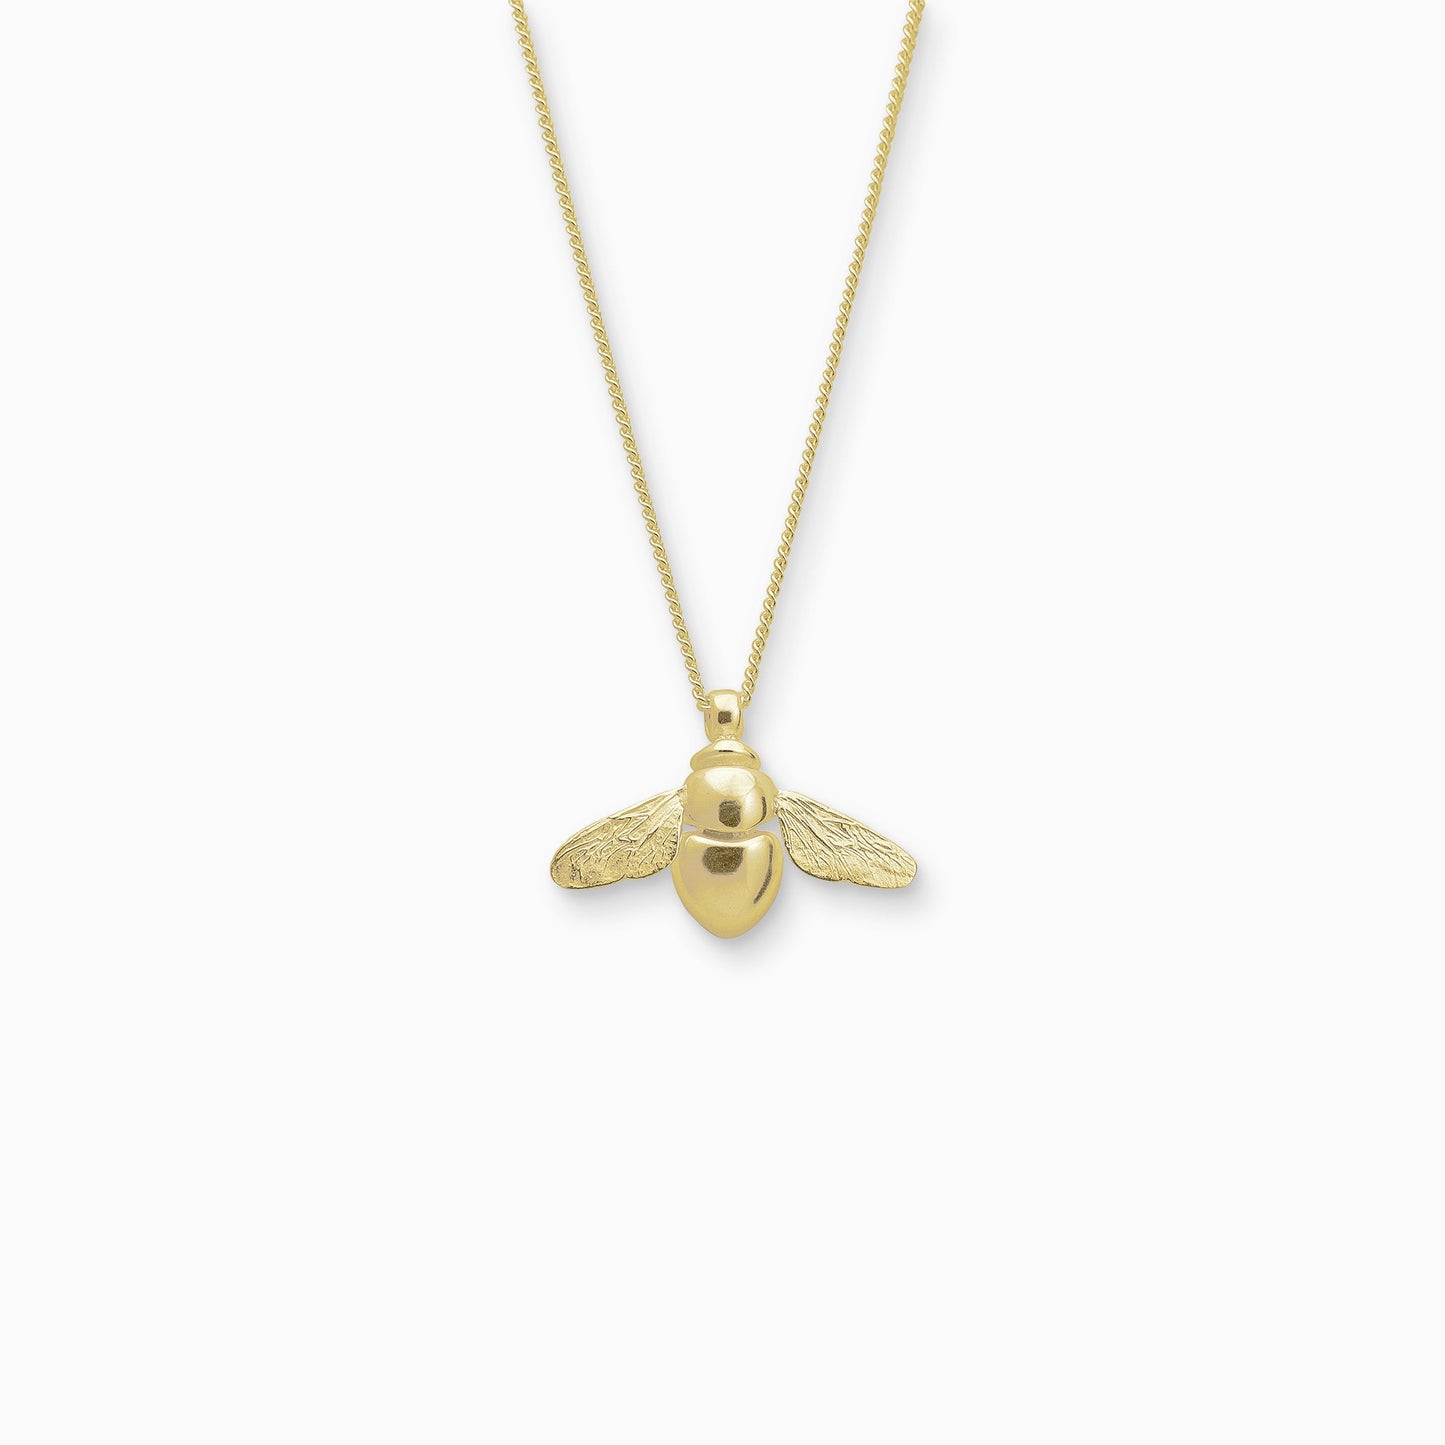 18ct Fairtrade yellow gold pendant in the exact form of a Bumble Bee. 22mm x 28mm on a 45cm fine curb chain.The body of the Bee is smooth and shiny and the wings are textured with veins.